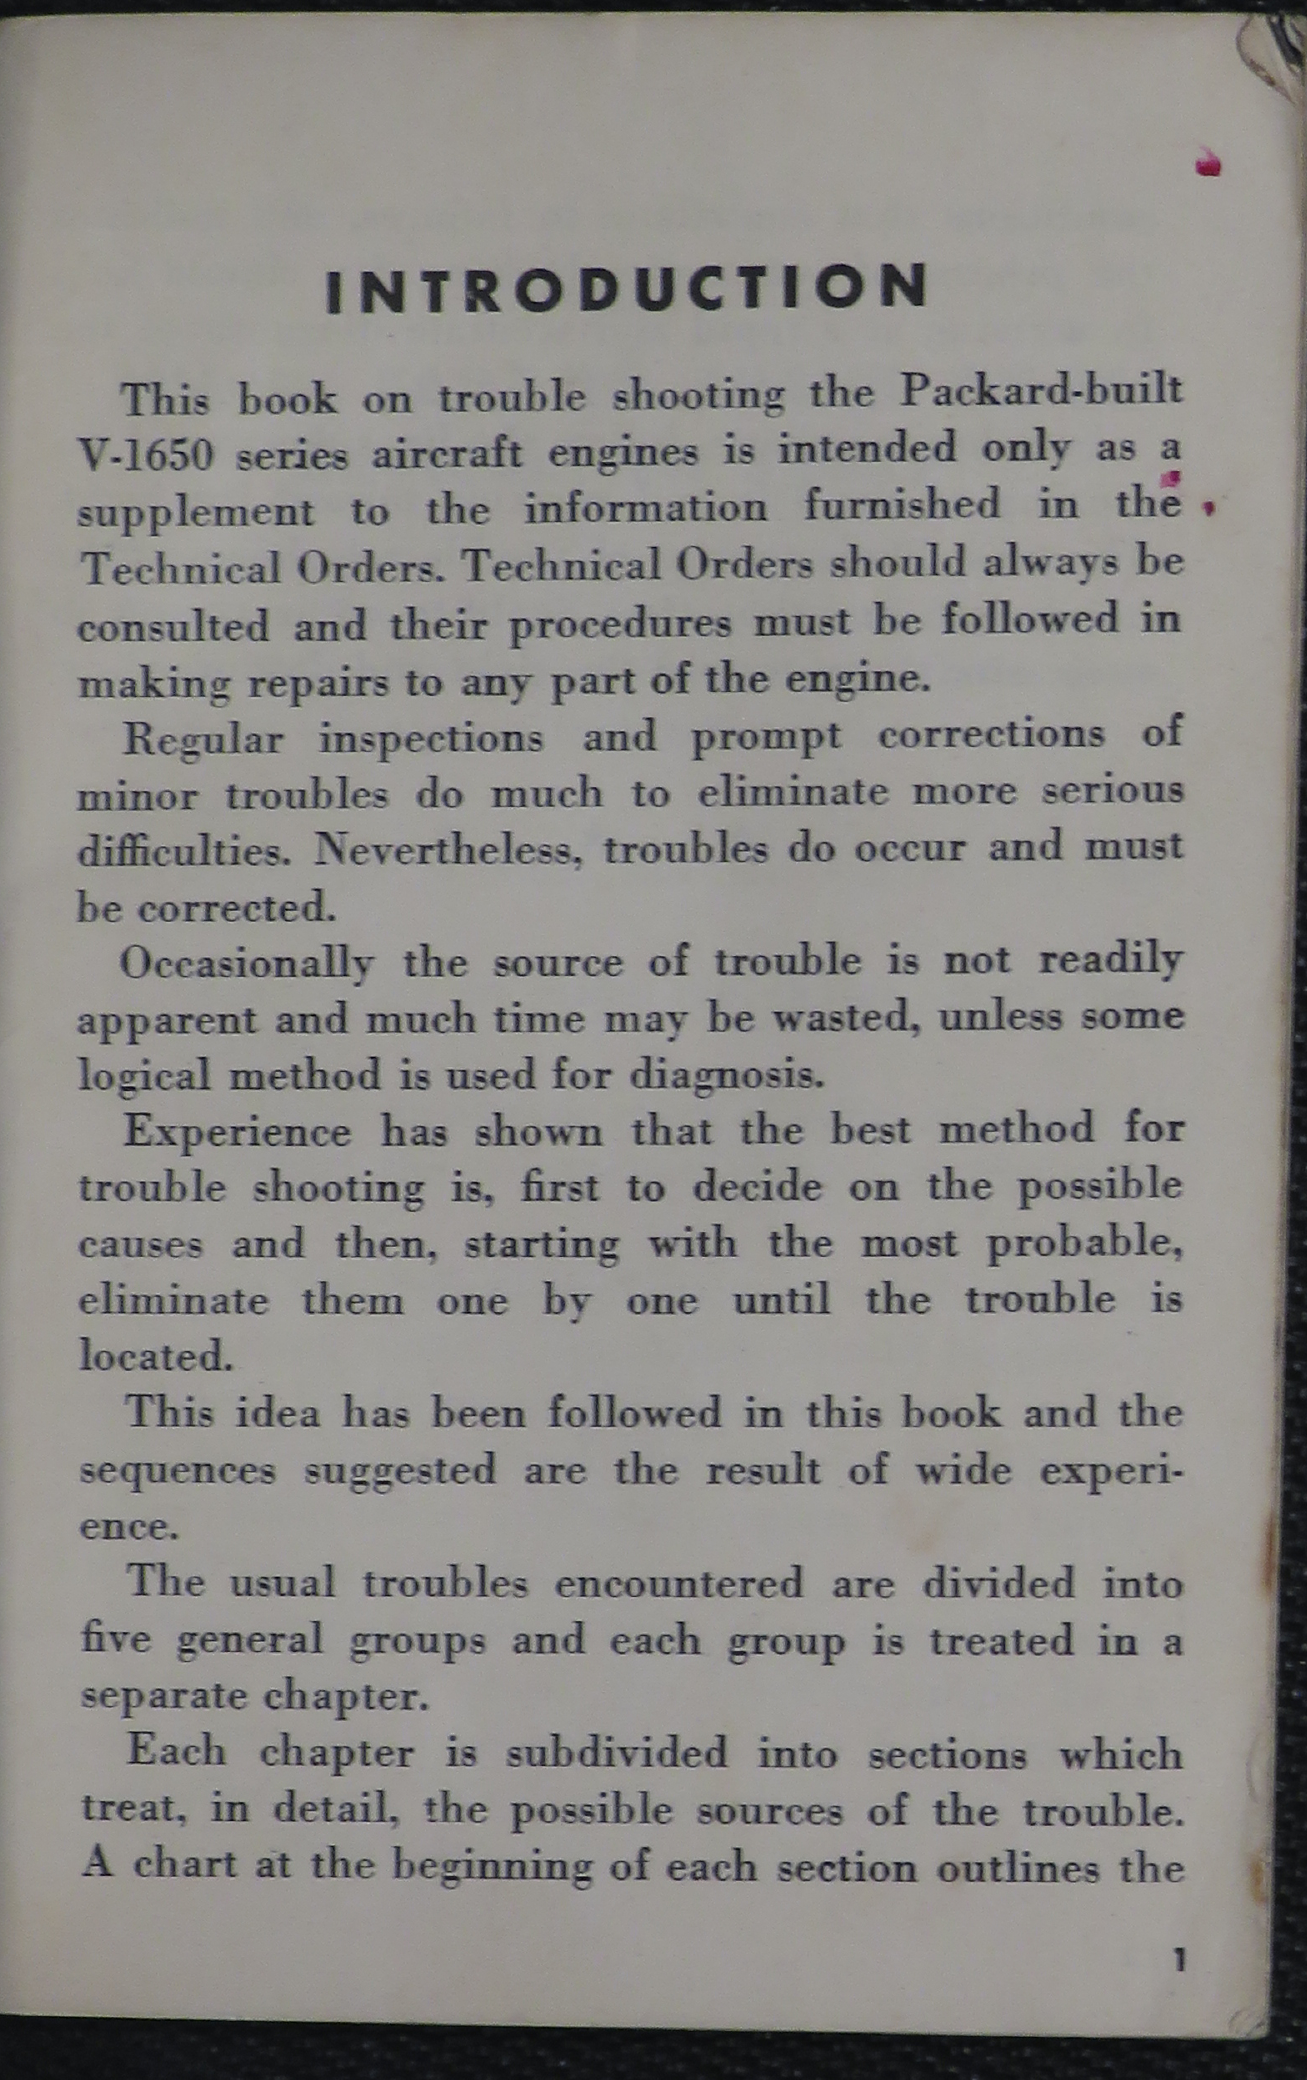 Sample page 5 from AirCorps Library document: Trouble Shooting the Packard Built V-1650 Series Engines